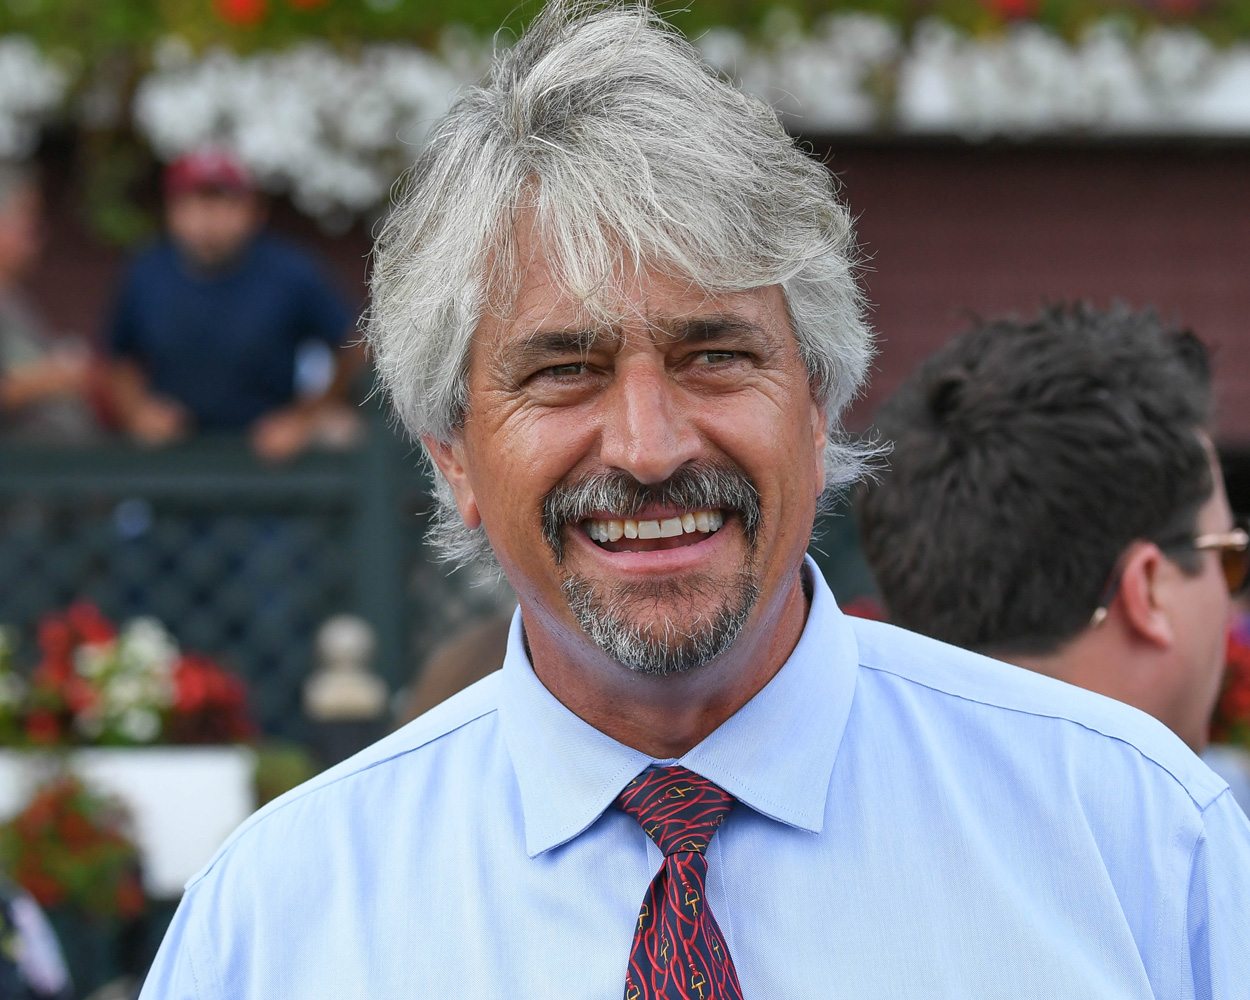 Steve Asmussen after winning the 2019 Hopeful Stakes with Basin at Saratoga Race Course (Bob Mayberger)